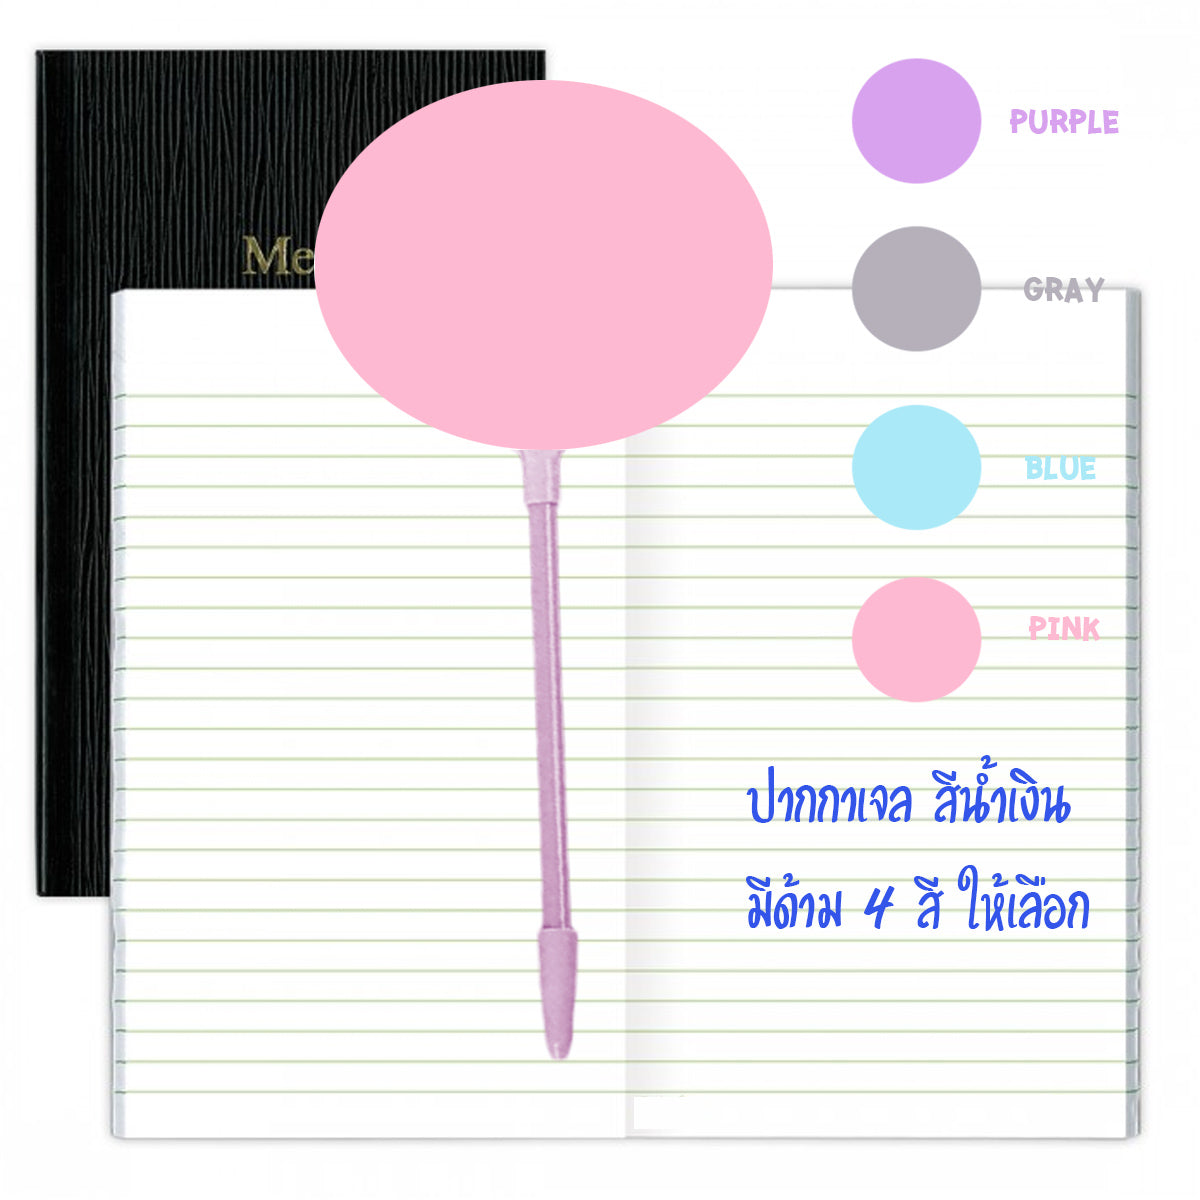 Personalised Oval Pen Blue Ink Color Accessories Custom Photo - HANDLE PINK